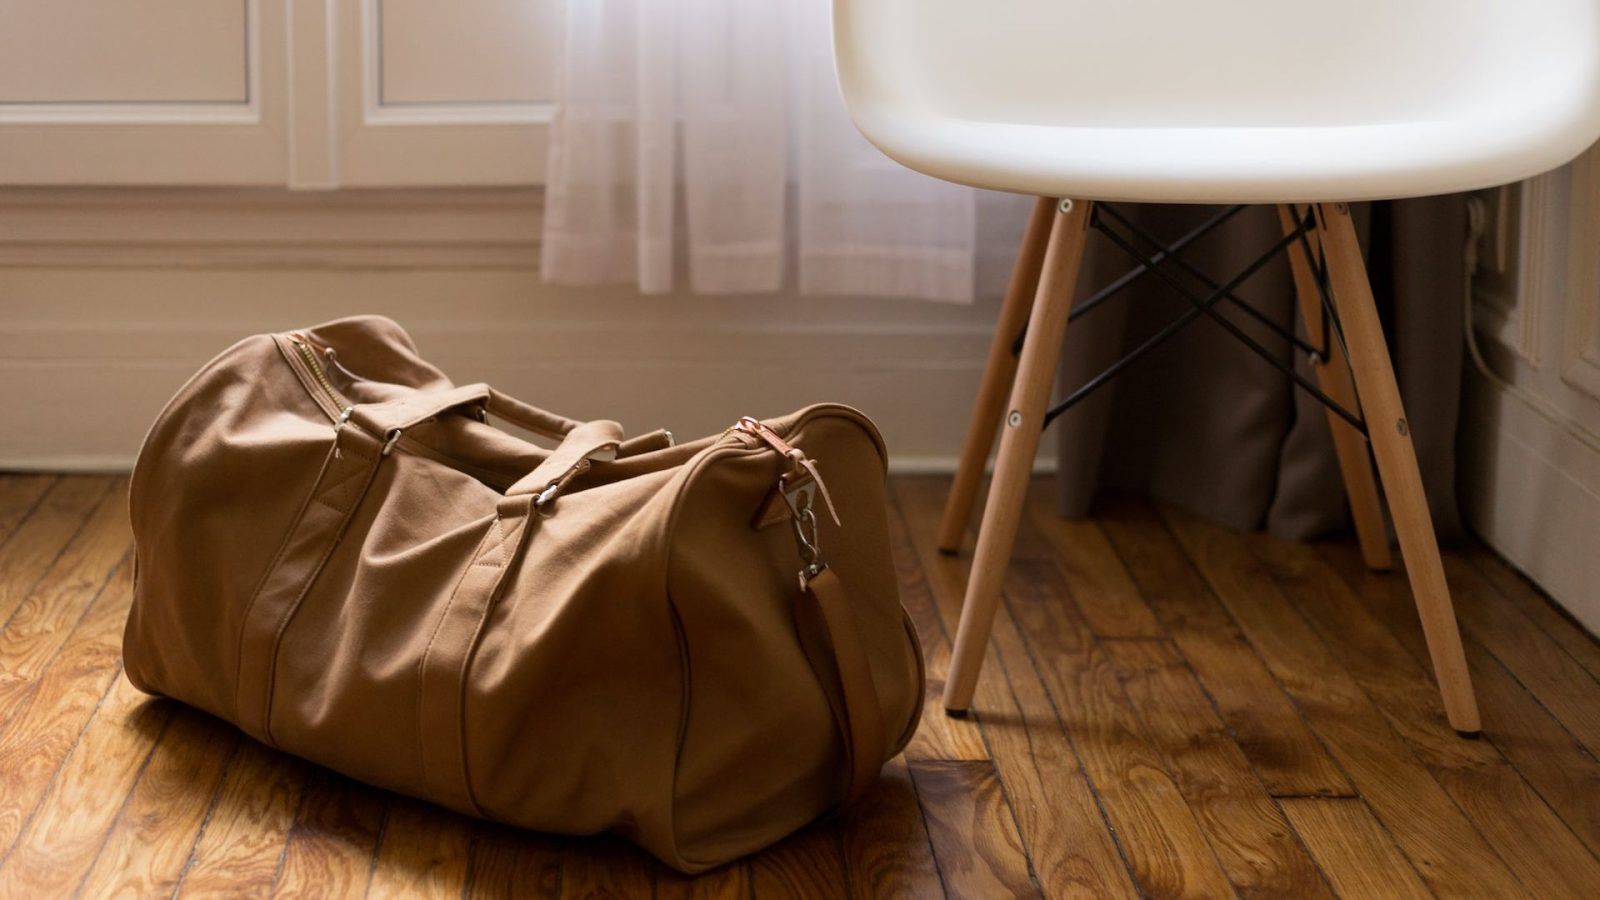 Get, set, packing! Check out the best travel bags for men on the move